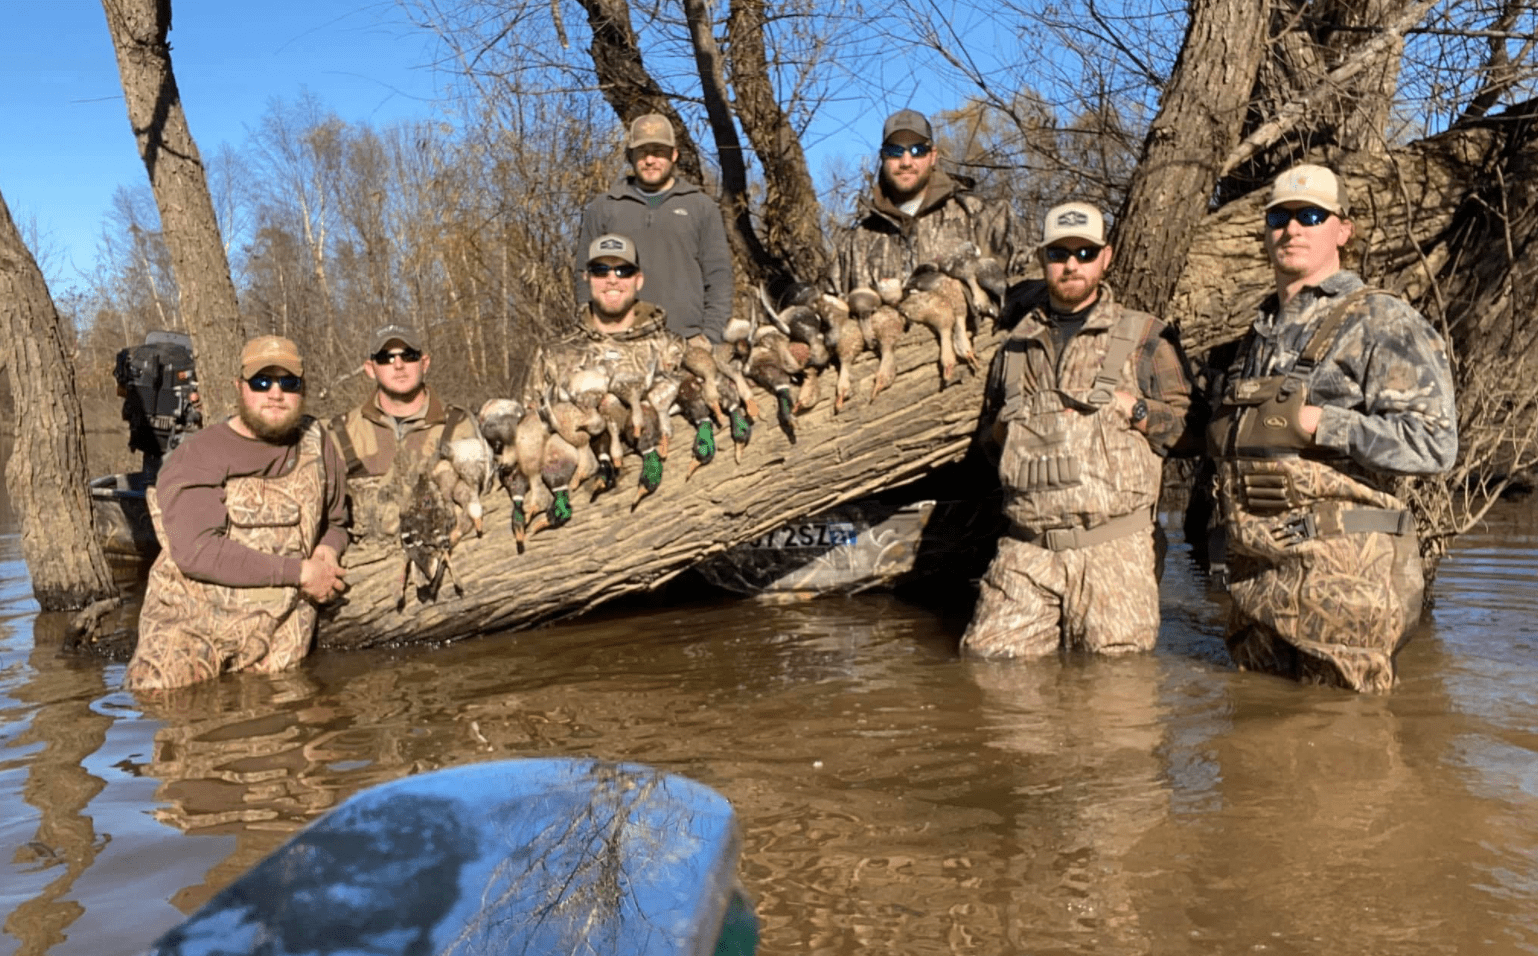 Zack grooms and hunters on Reelfoot